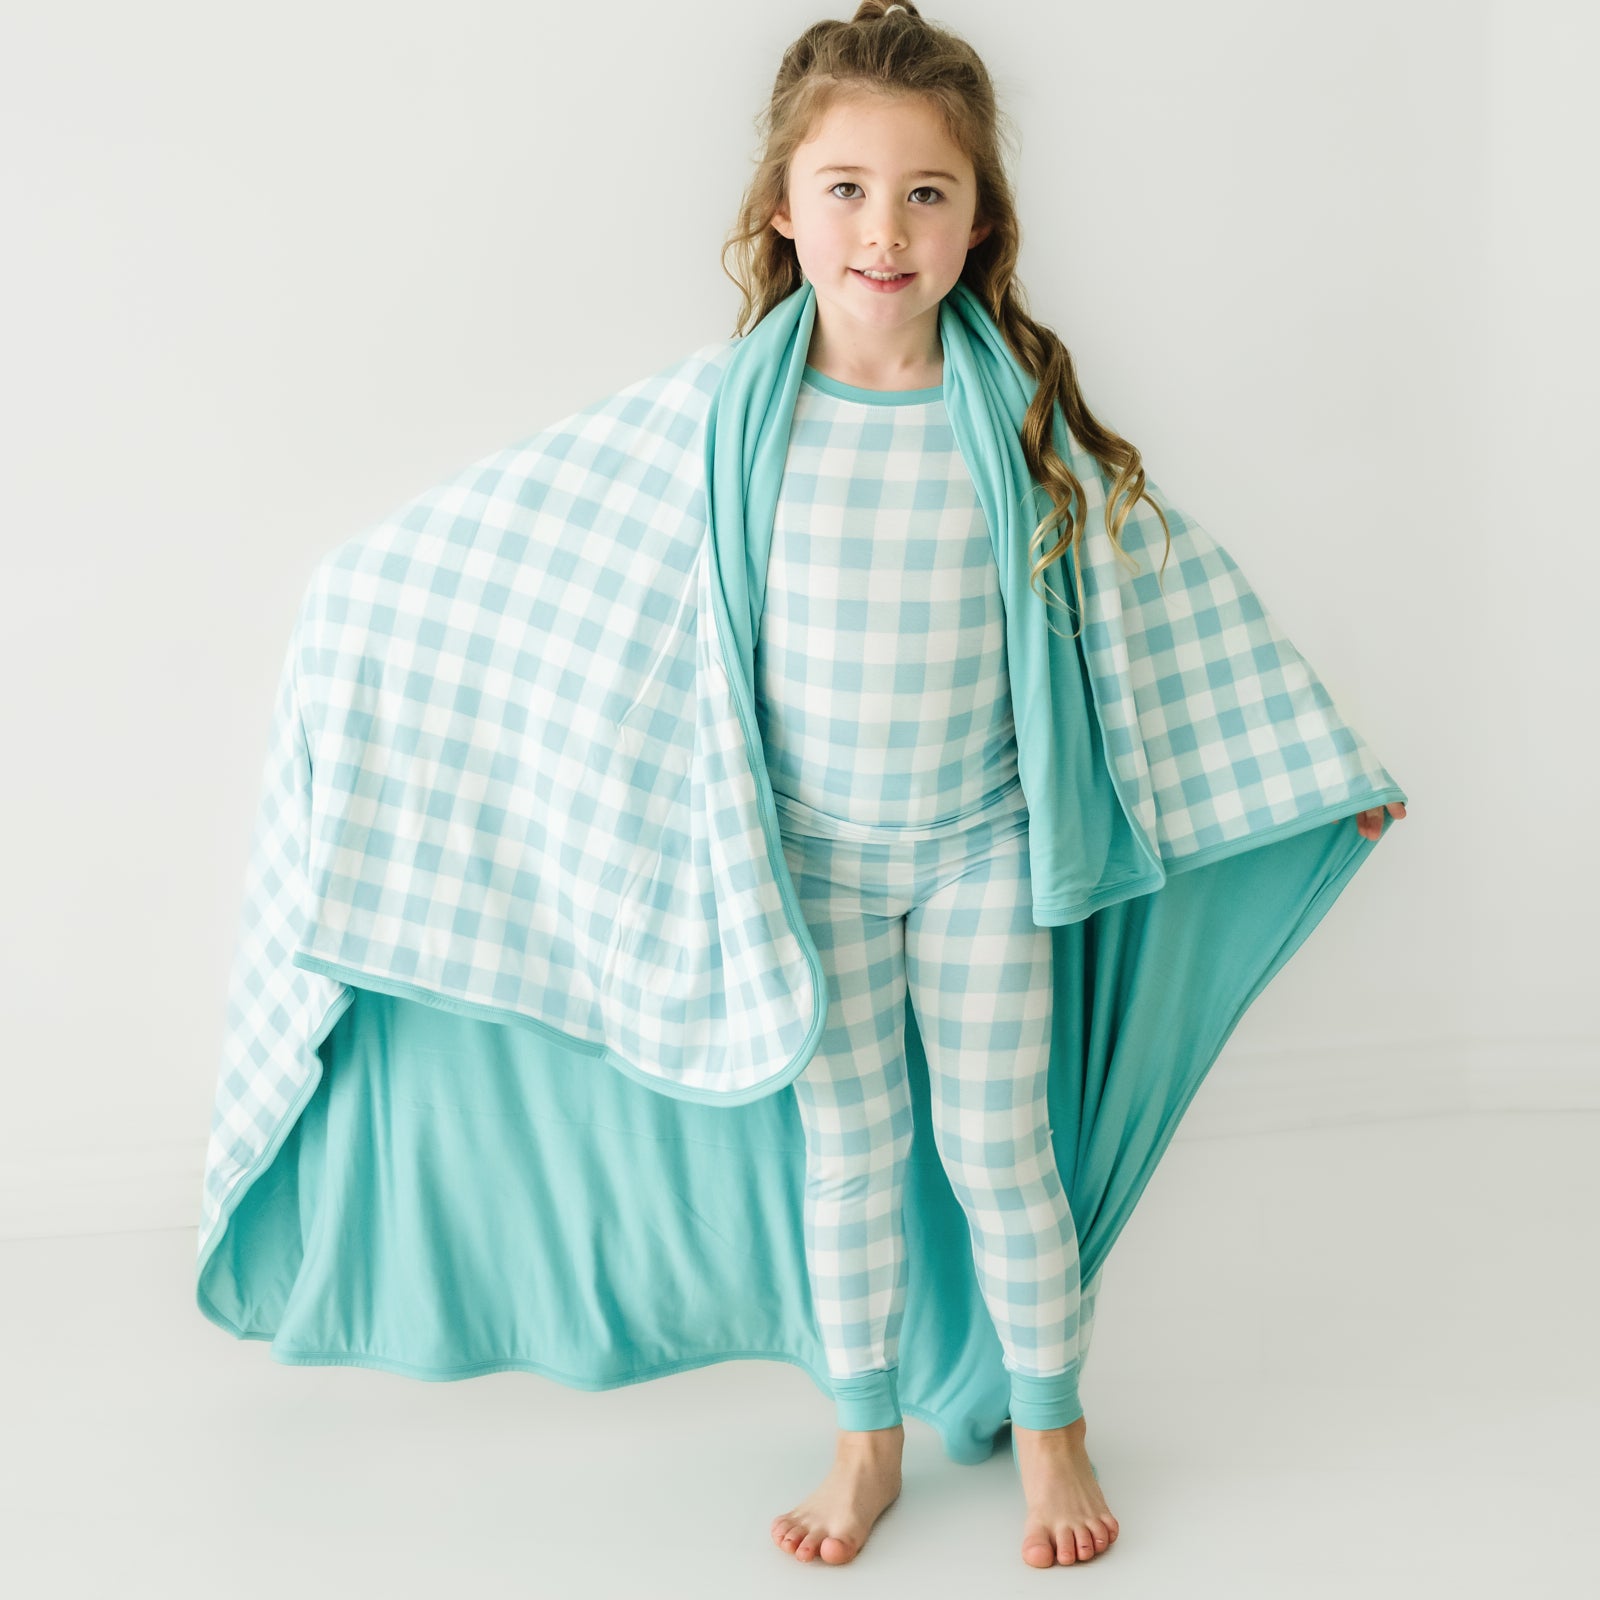 Alternate image of a child wearing a Aqua Gingham cloud blanket over her shoulders and a matching aqua gingham two piece pajama set